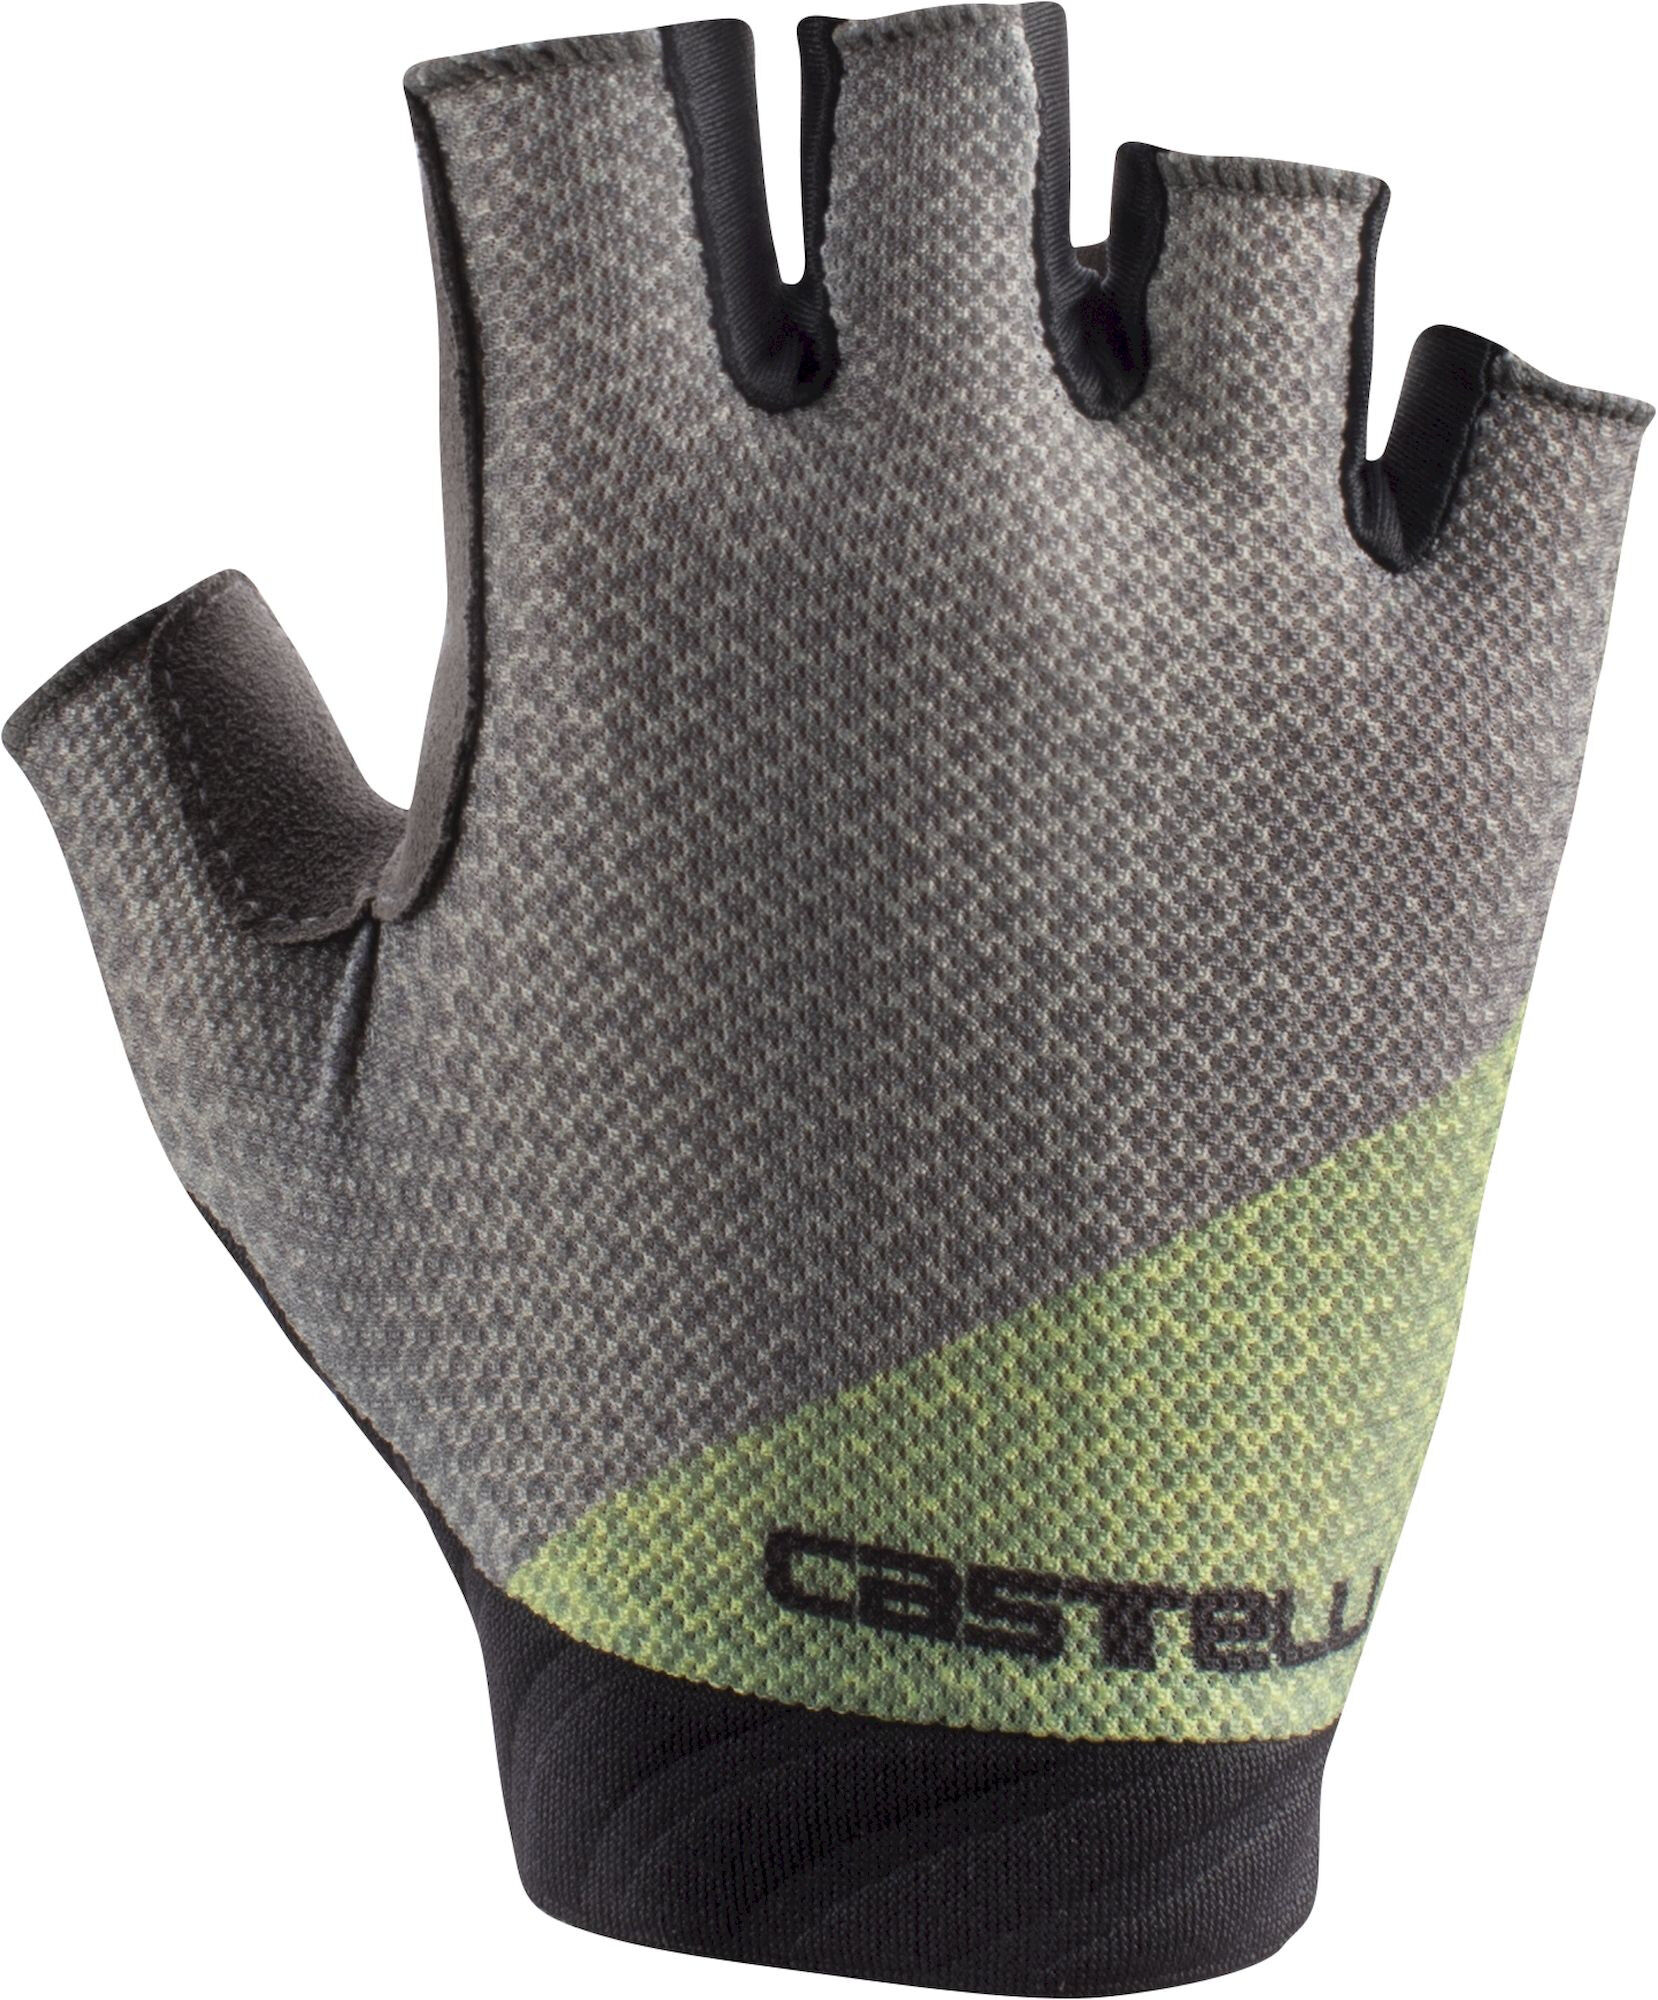 Castelli Roubaix Gel 2 Glove - Guantes ciclismo - Mujer